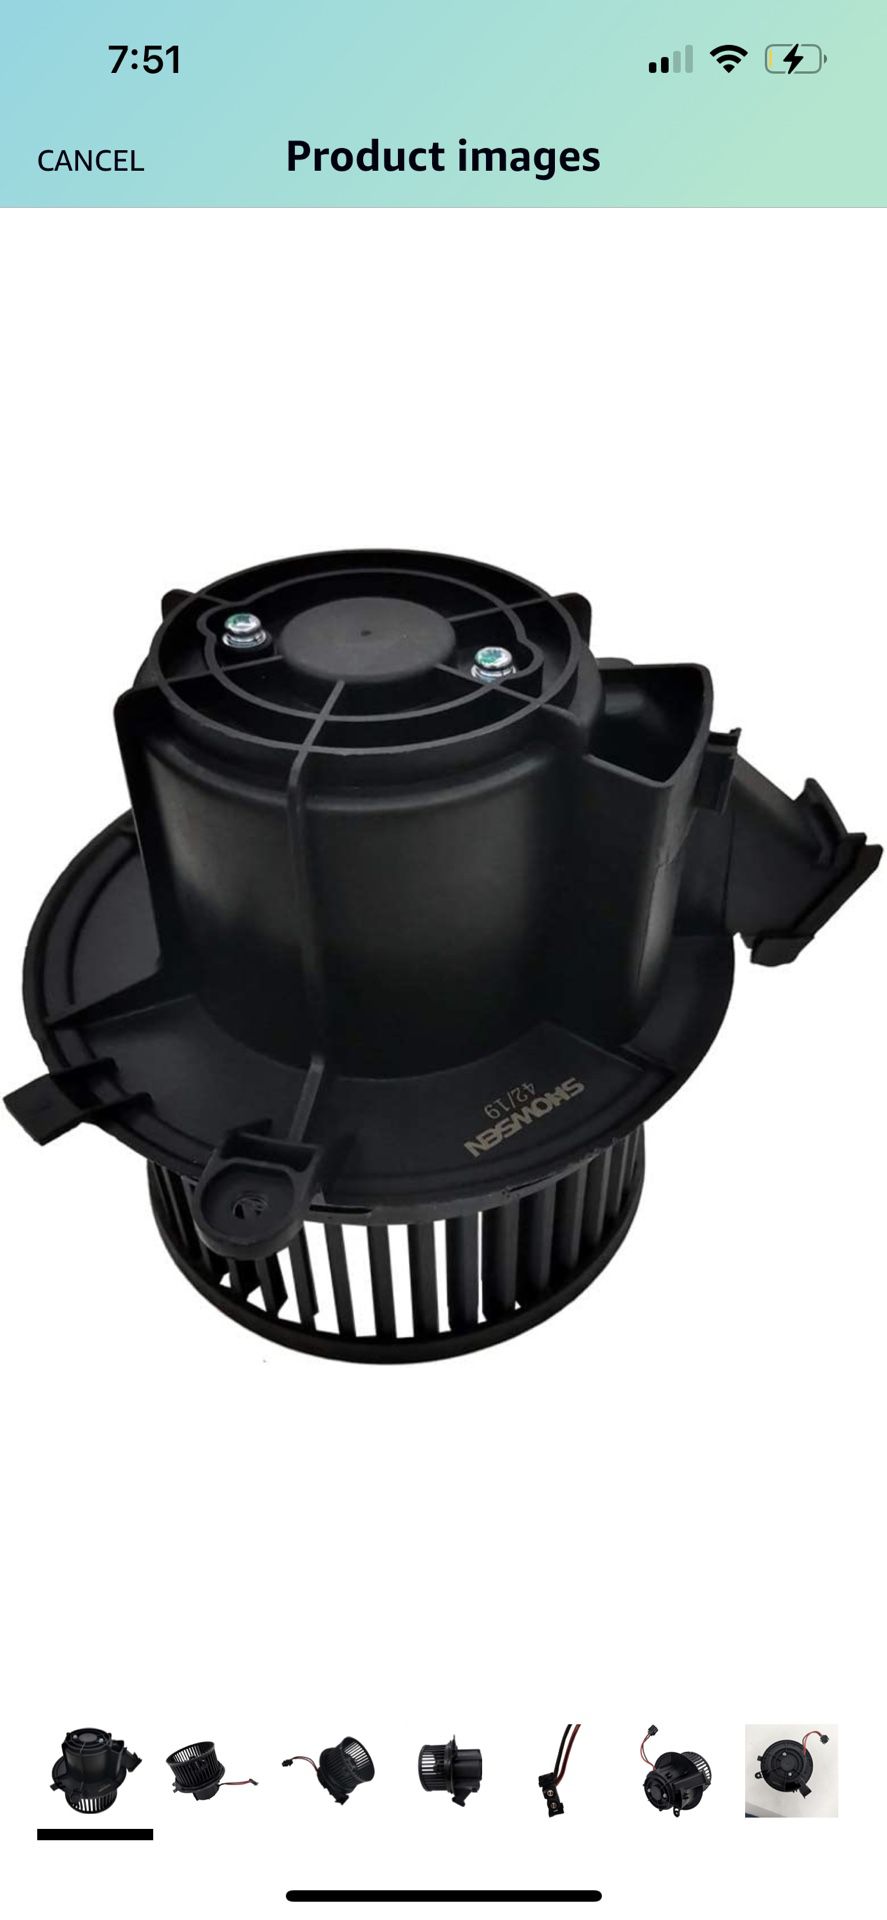 AC Heater Blower Motor W/Fan Cage Fit 2008-2009 MERCEDES-BENZ C230 C63 AMG 2010-2011 C250 E(contact info removed)-2016 C(contact info removed)-2010 C3